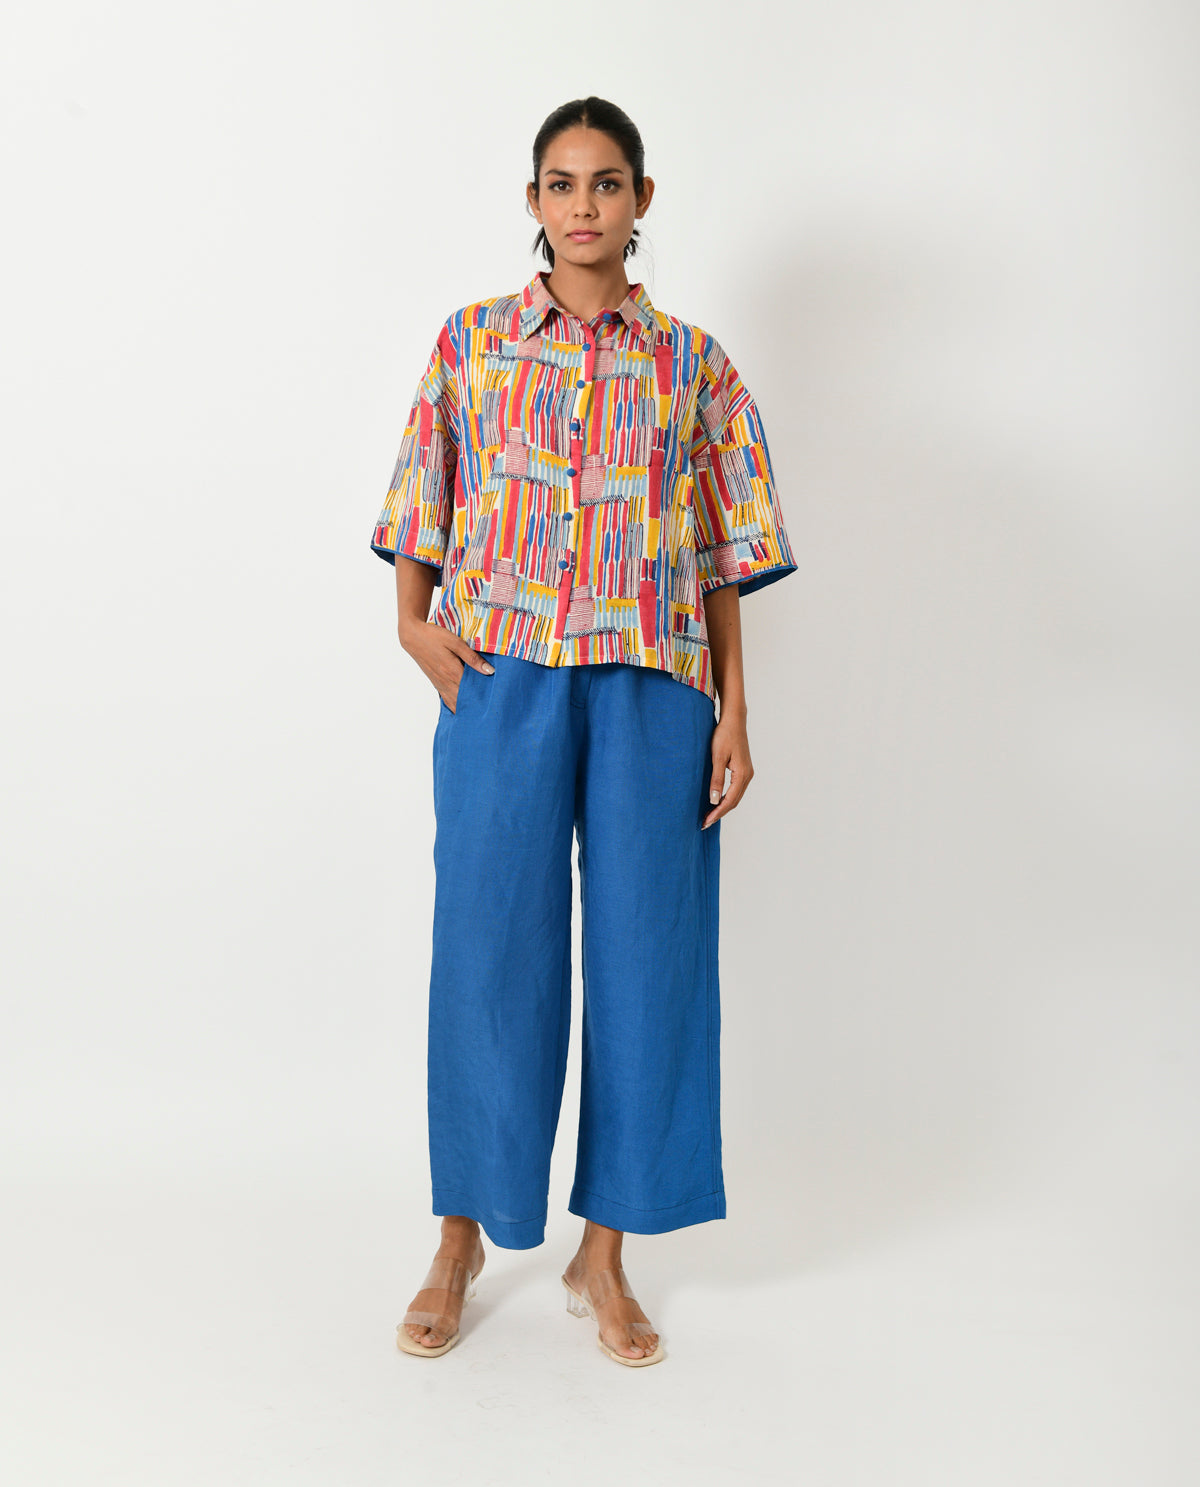 Multicolor Linen-Co-ord Set at Kamakhyaa by Rias Jaipur. This item is Casual Wear, Co-ord Sets, Linen Blend, Multicolor, Natural, Prints, Relaxed Fit, Scribble Prints, Vacation Co-ords, Womenswear, Yaadein